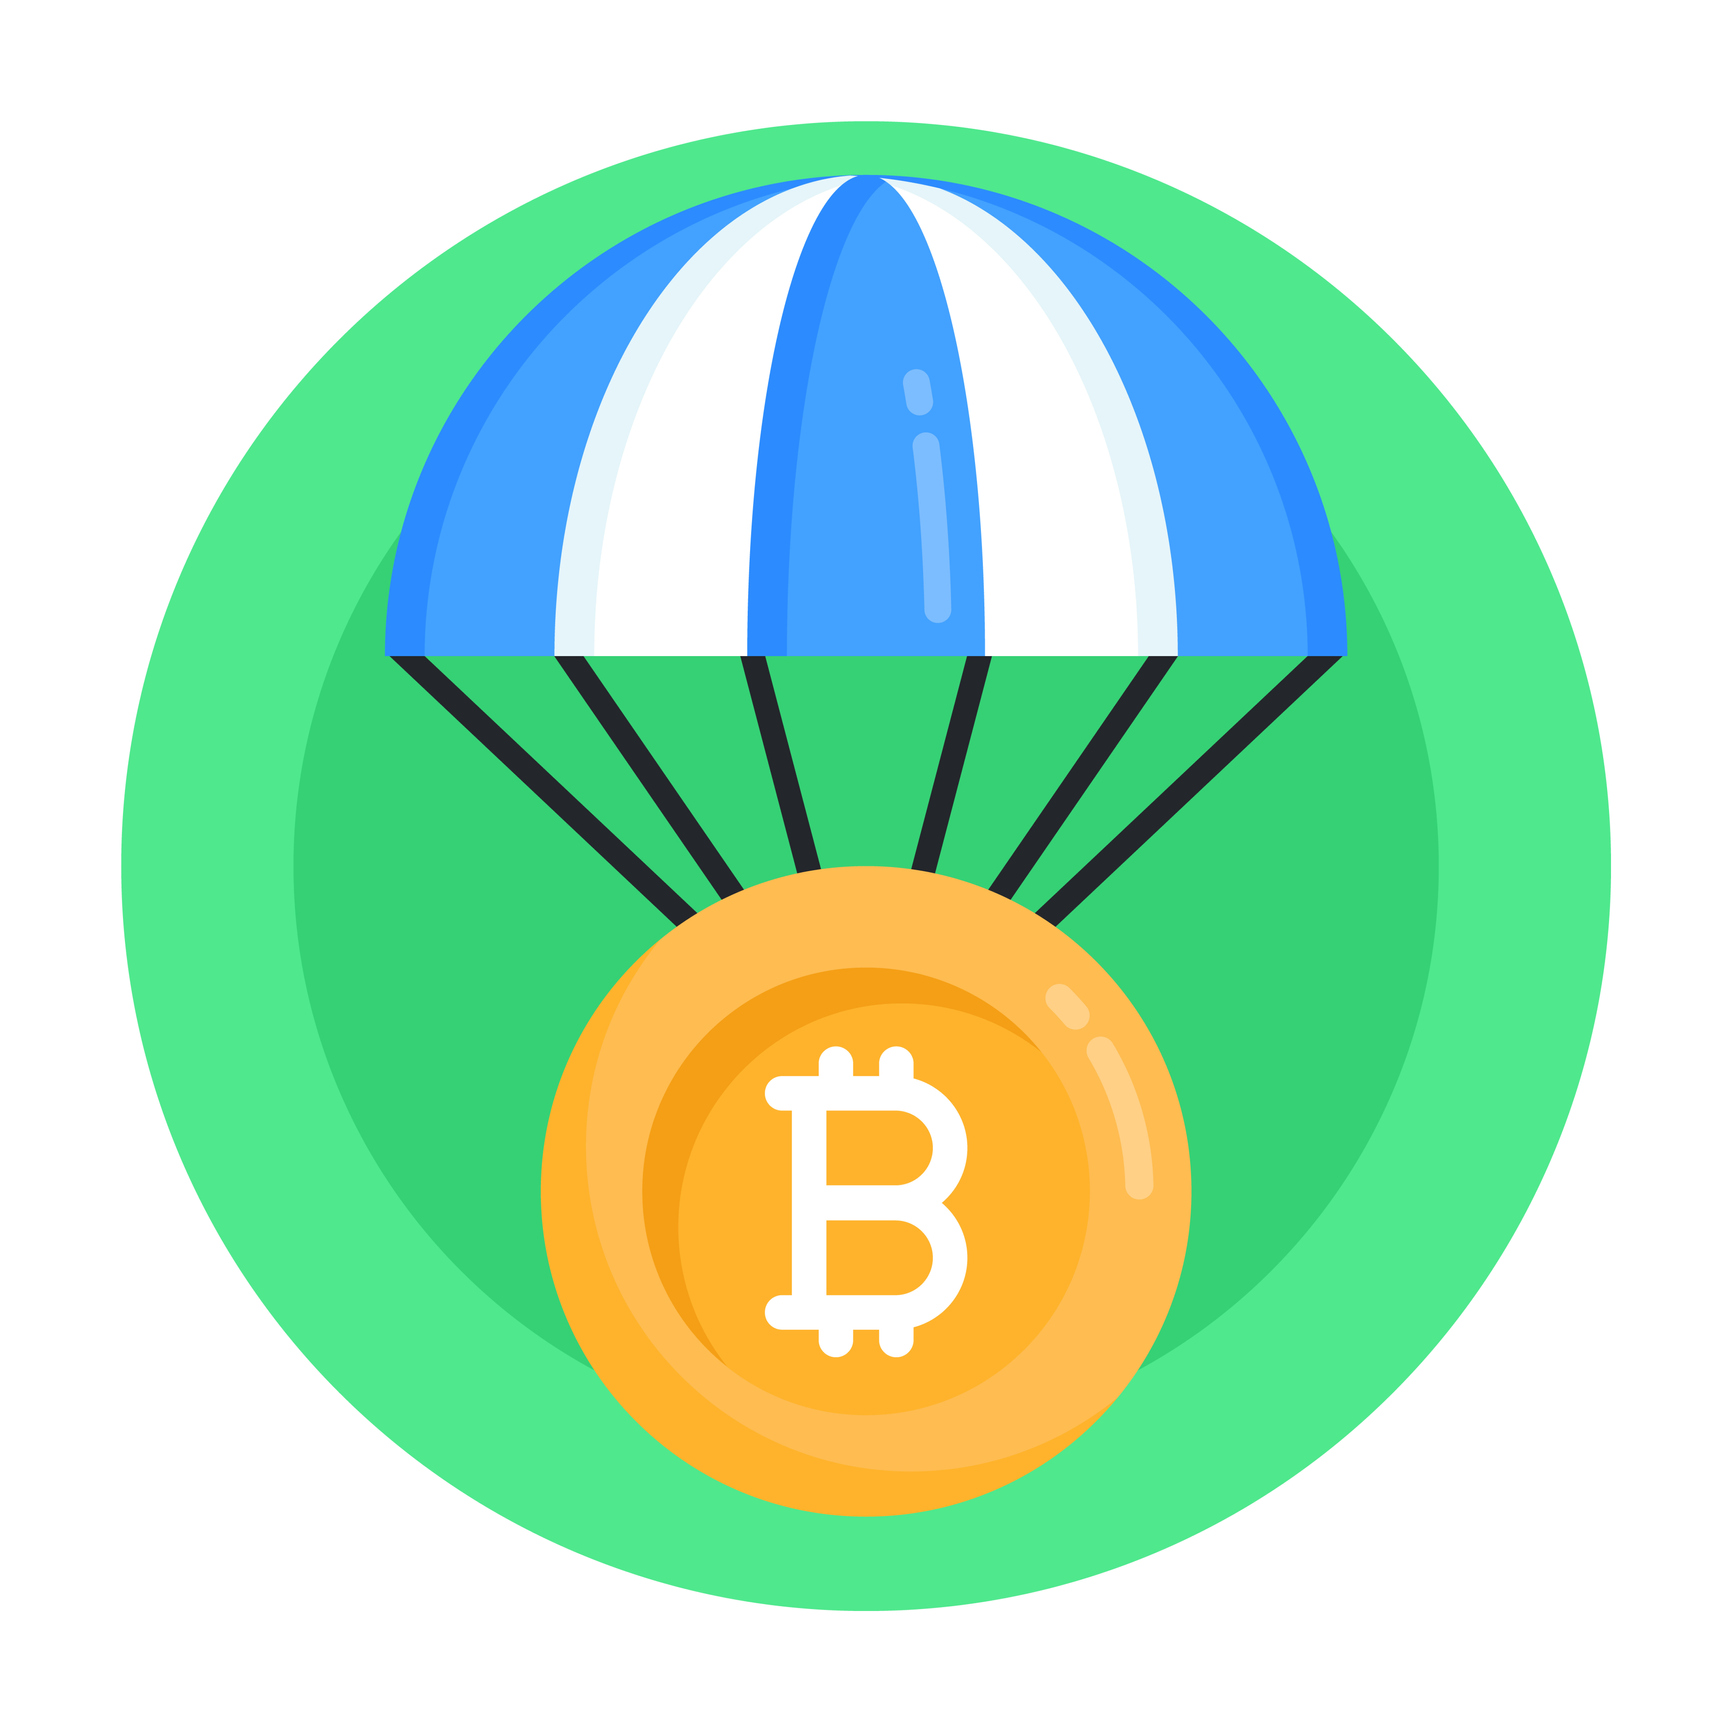 Btc airdrop forex trading for beginners philippines country